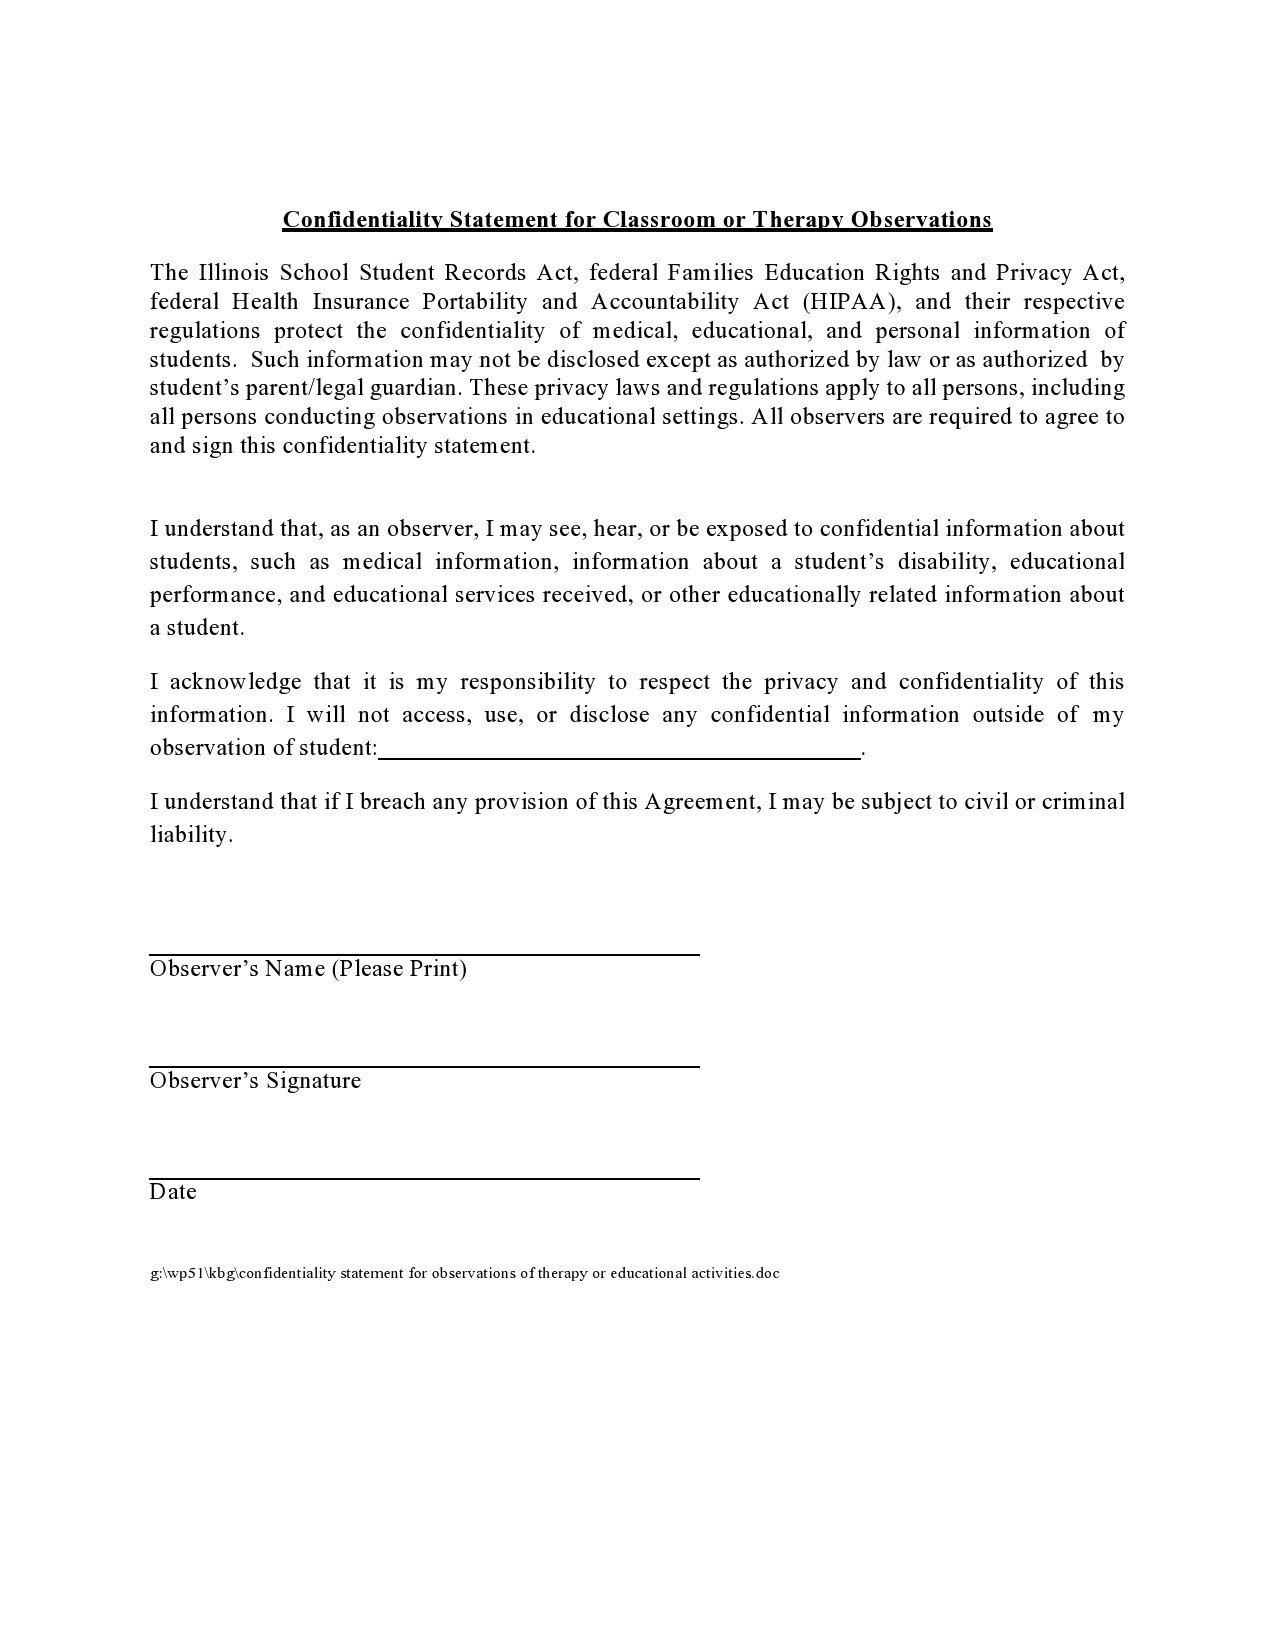 22 Free Confidentiality Statement Templates - Word Templates for Regarding therapy confidentiality agreement template